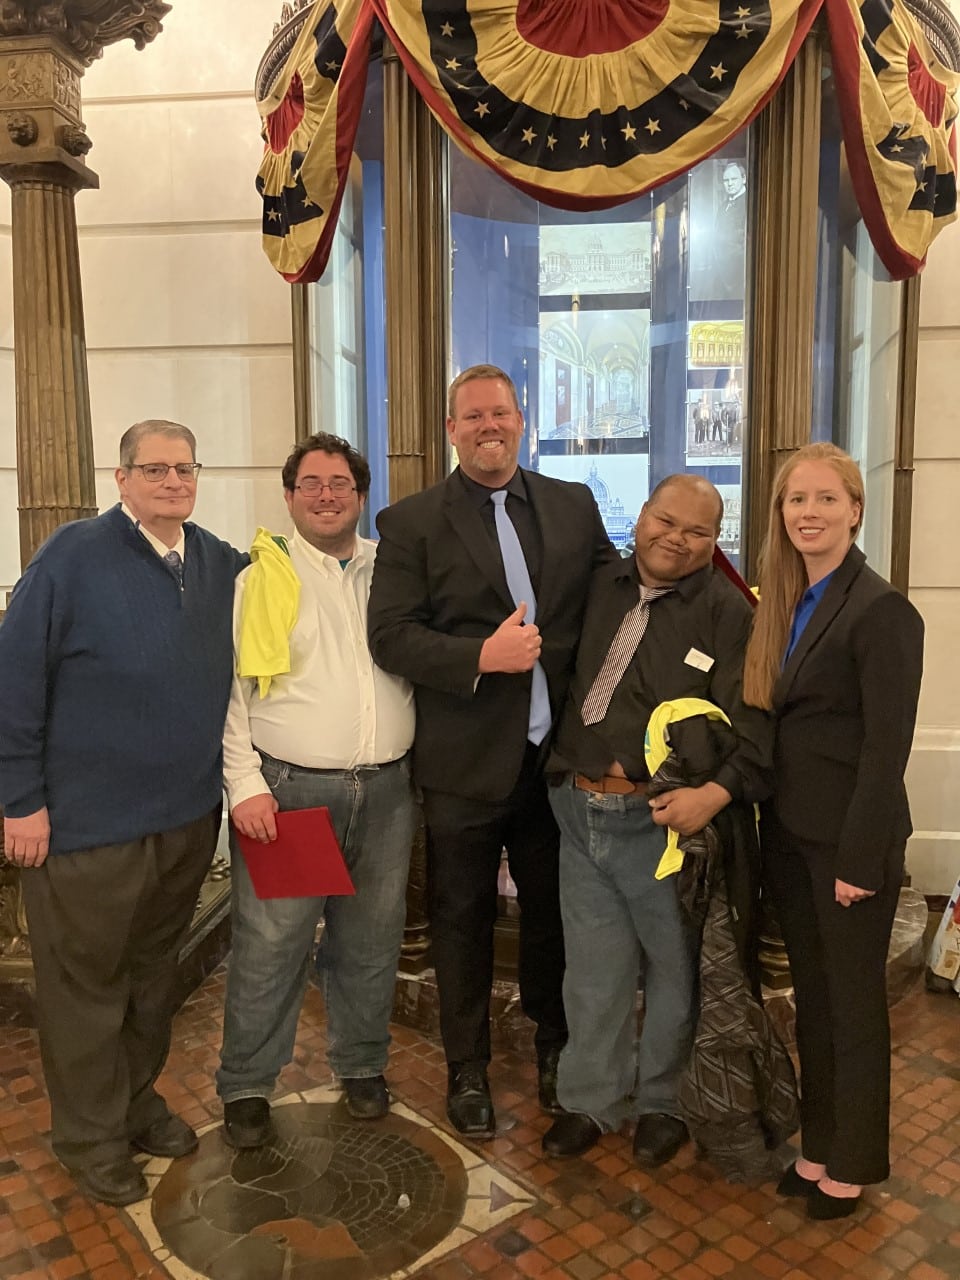 Executive directors Tabitha Buchinsky and Stephen Hall are pictured here with senior direct support professional Bruce Hall and two individuals supported by Community Options Inc. This group made the early morning trip from western Pennsylvania to the capitol in Harrisburg to advocate for the need of increased wages for direct care workers.